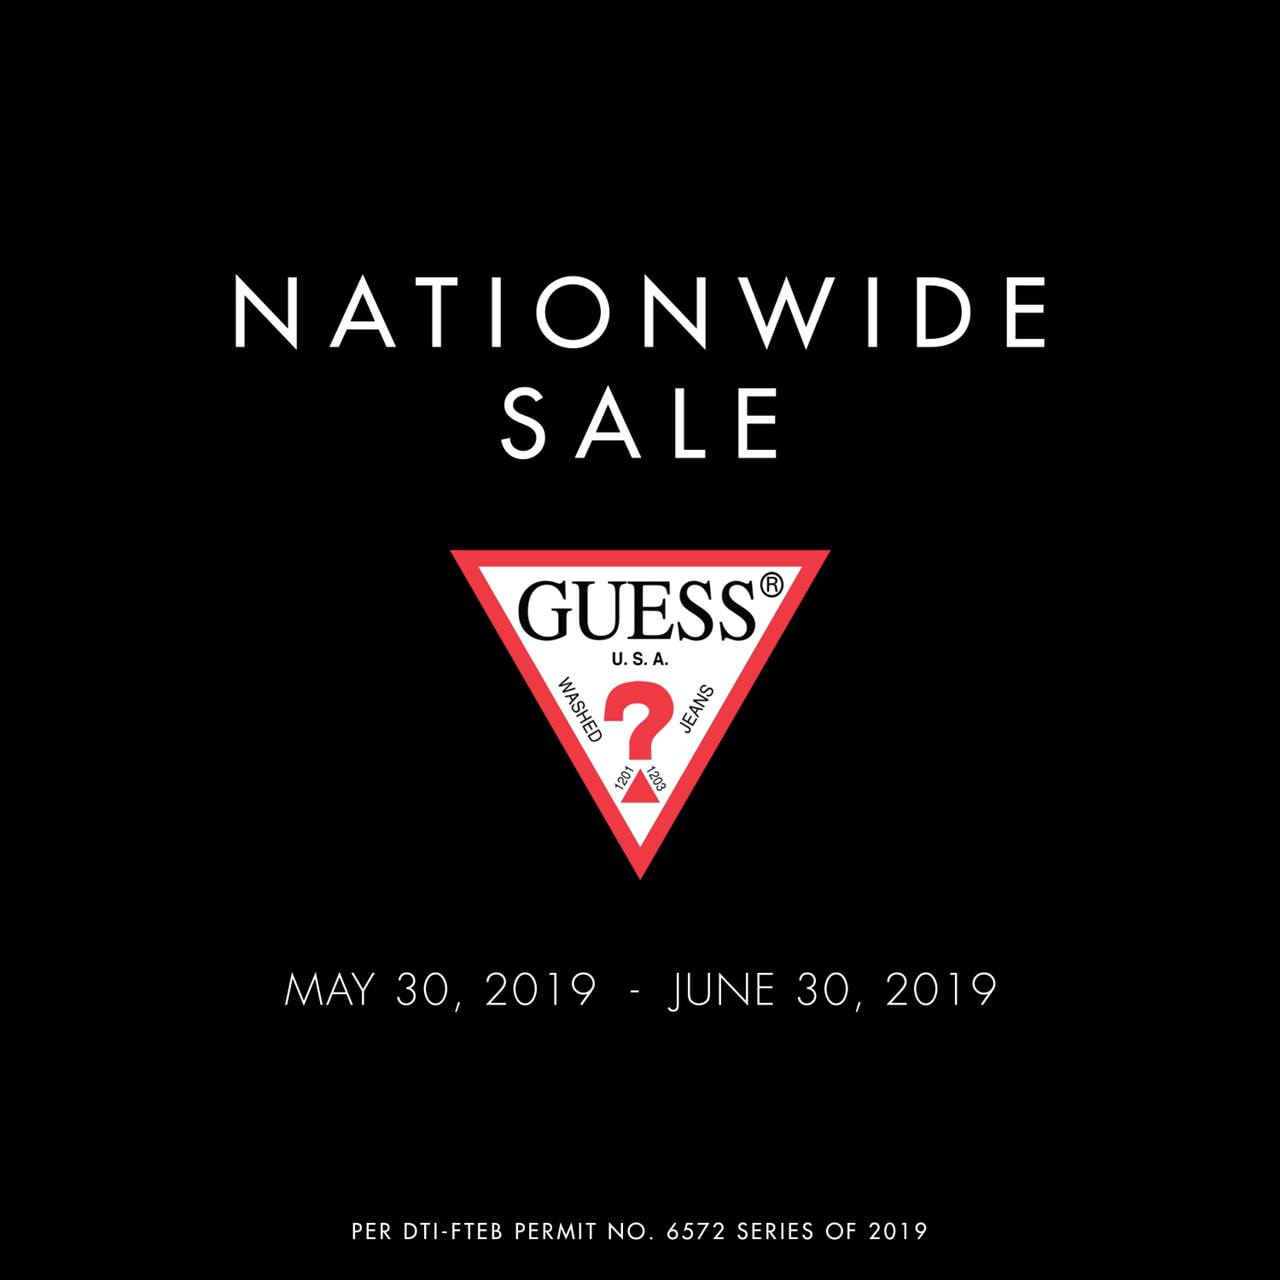 GUESS Nationwide Sale 2019